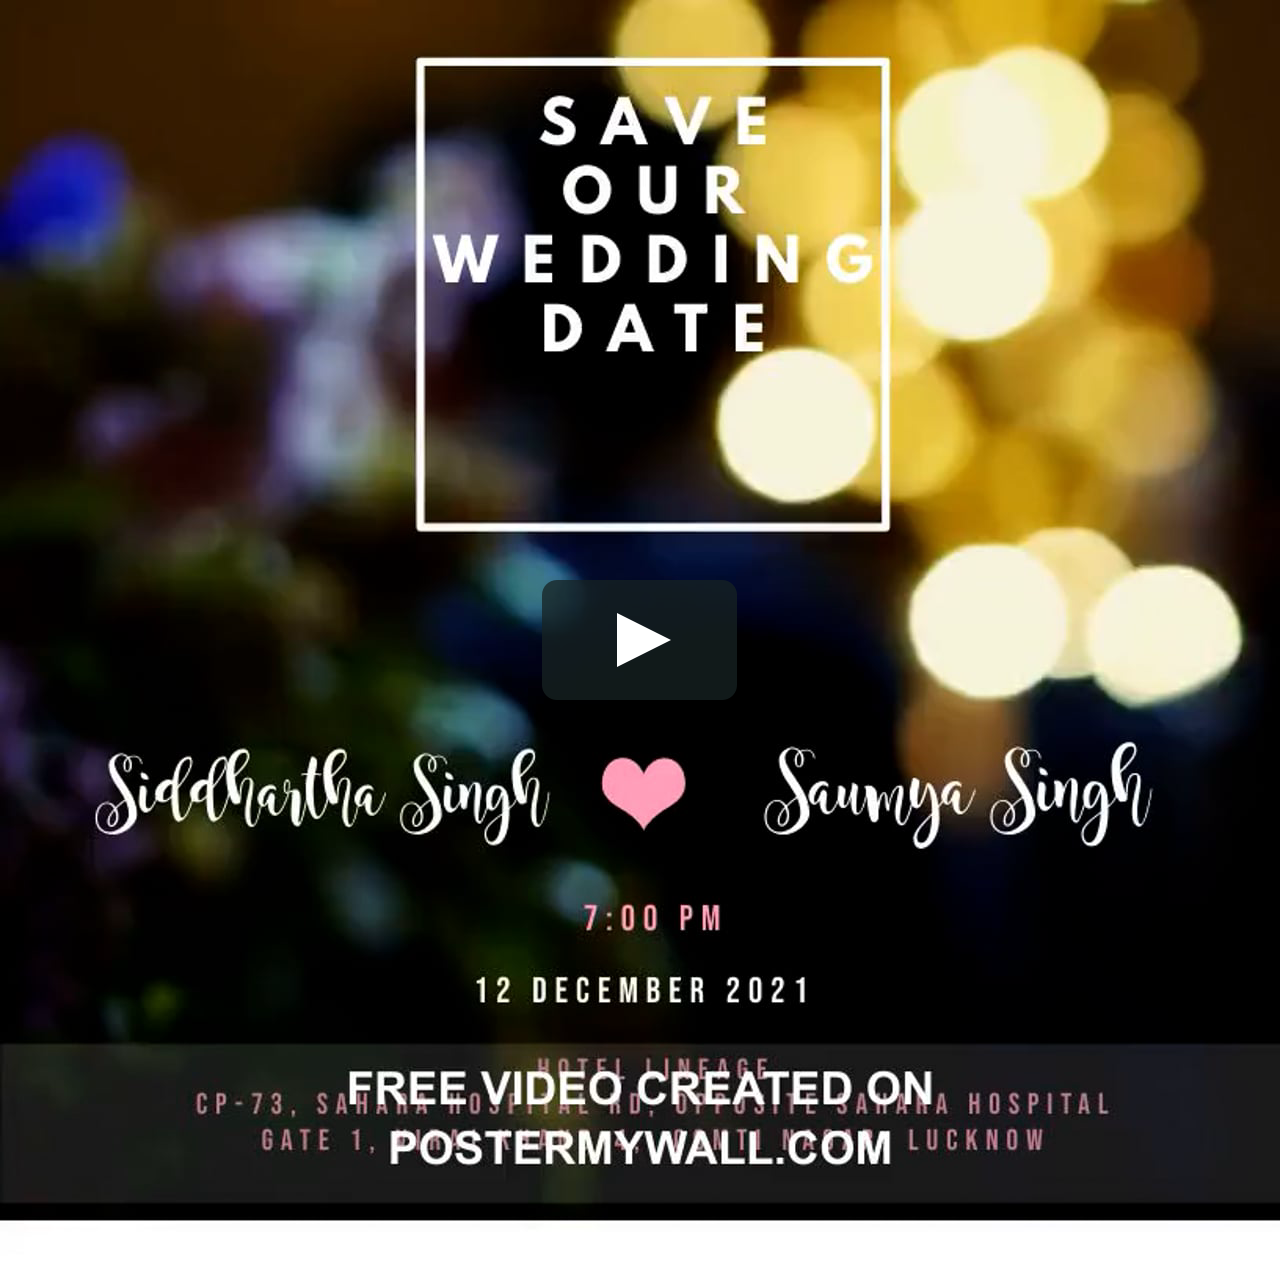 copy-of-save-the-date-video-template-made-with-postermywall-mp4-on-vimeo